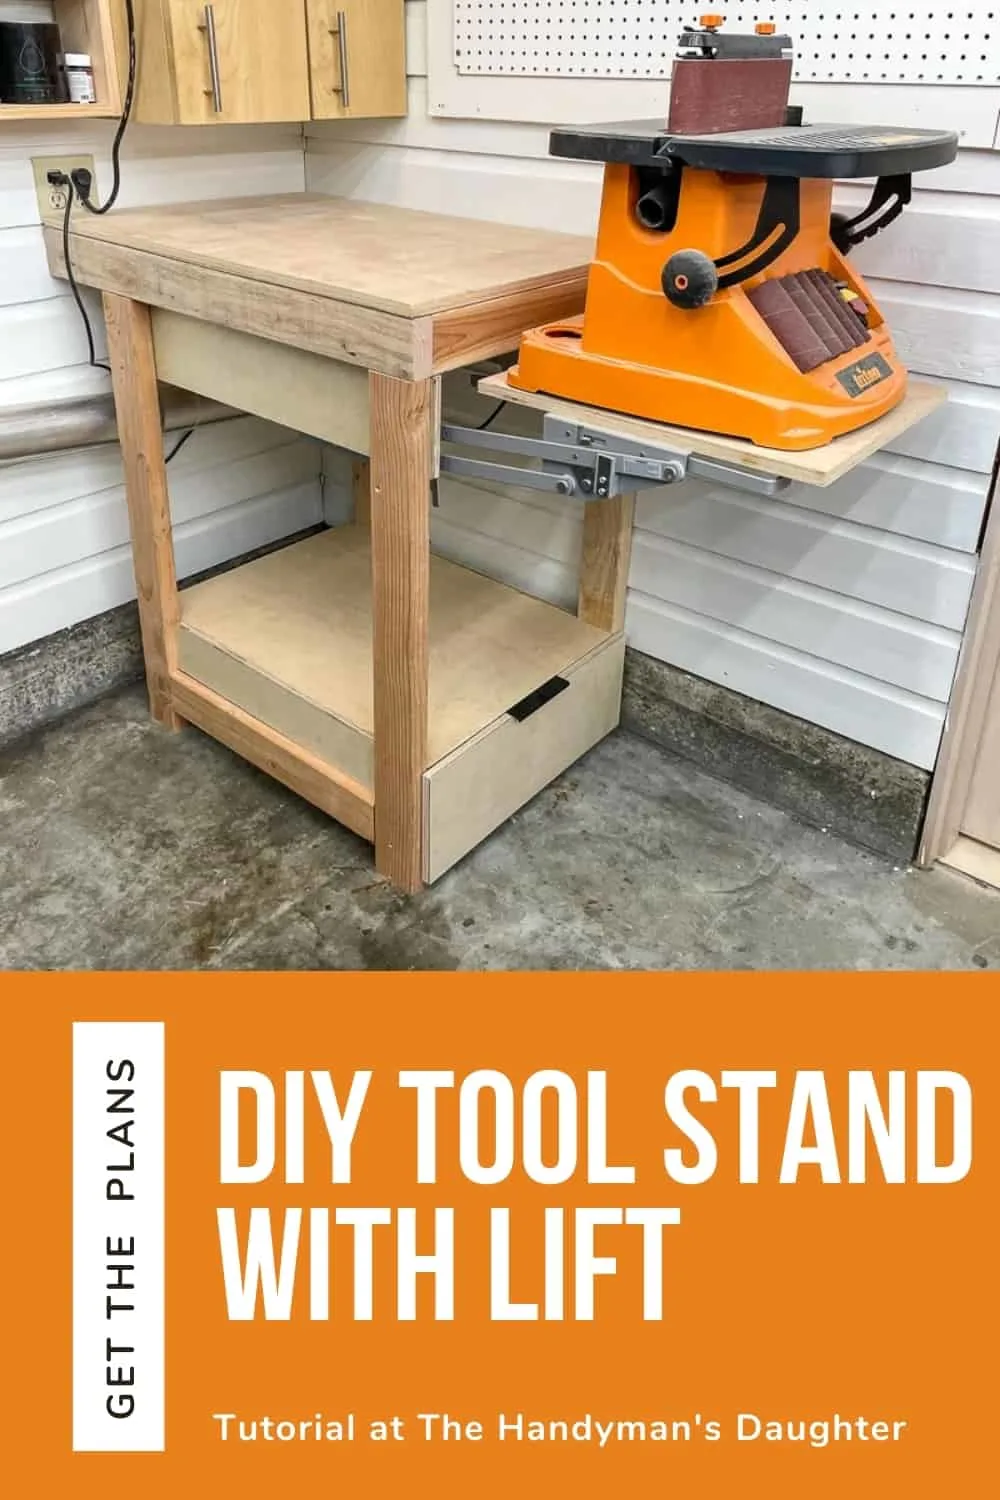 https://www.thehandymansdaughter.com/wp-content/uploads/2021/01/DIY-Tool-Stand-with-Lift-Pin-1.jpg.webp